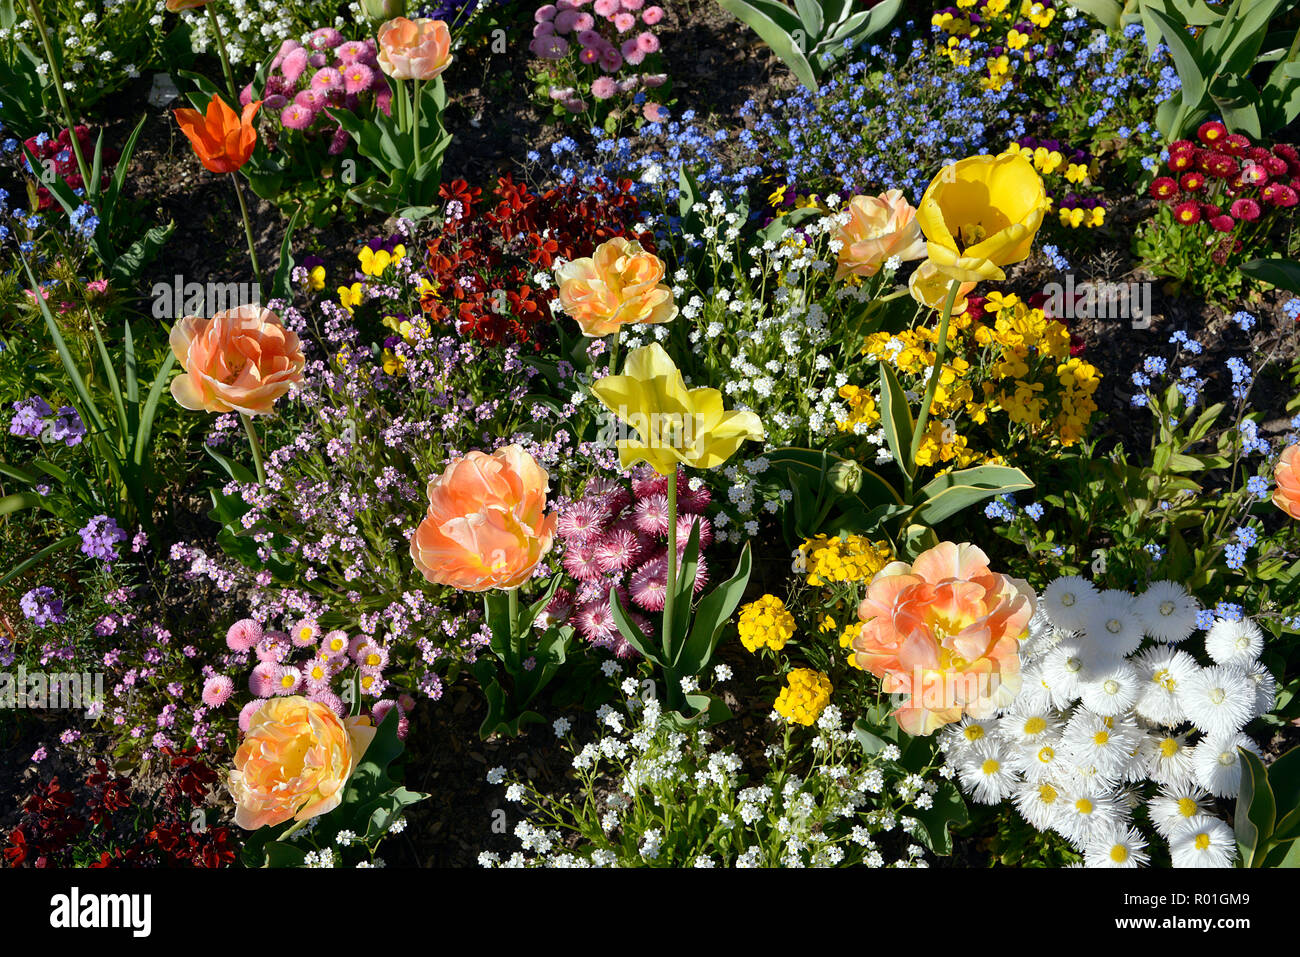 Flower bed with tulips, myosotis and daisy Stock Photo